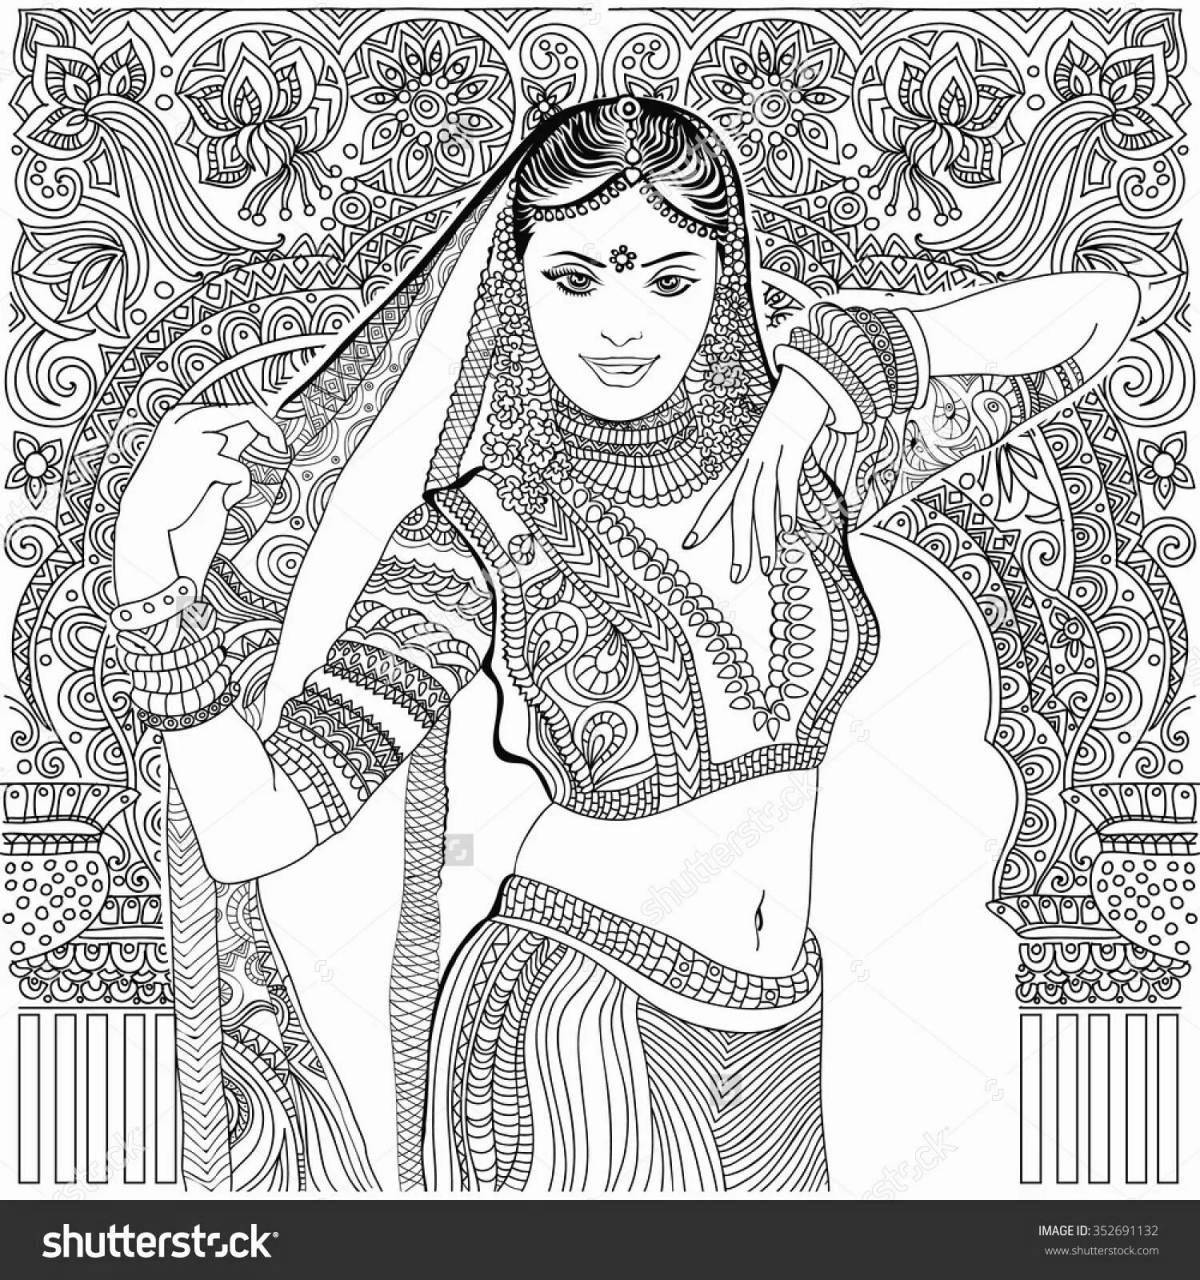 Colorful Indian coloring book